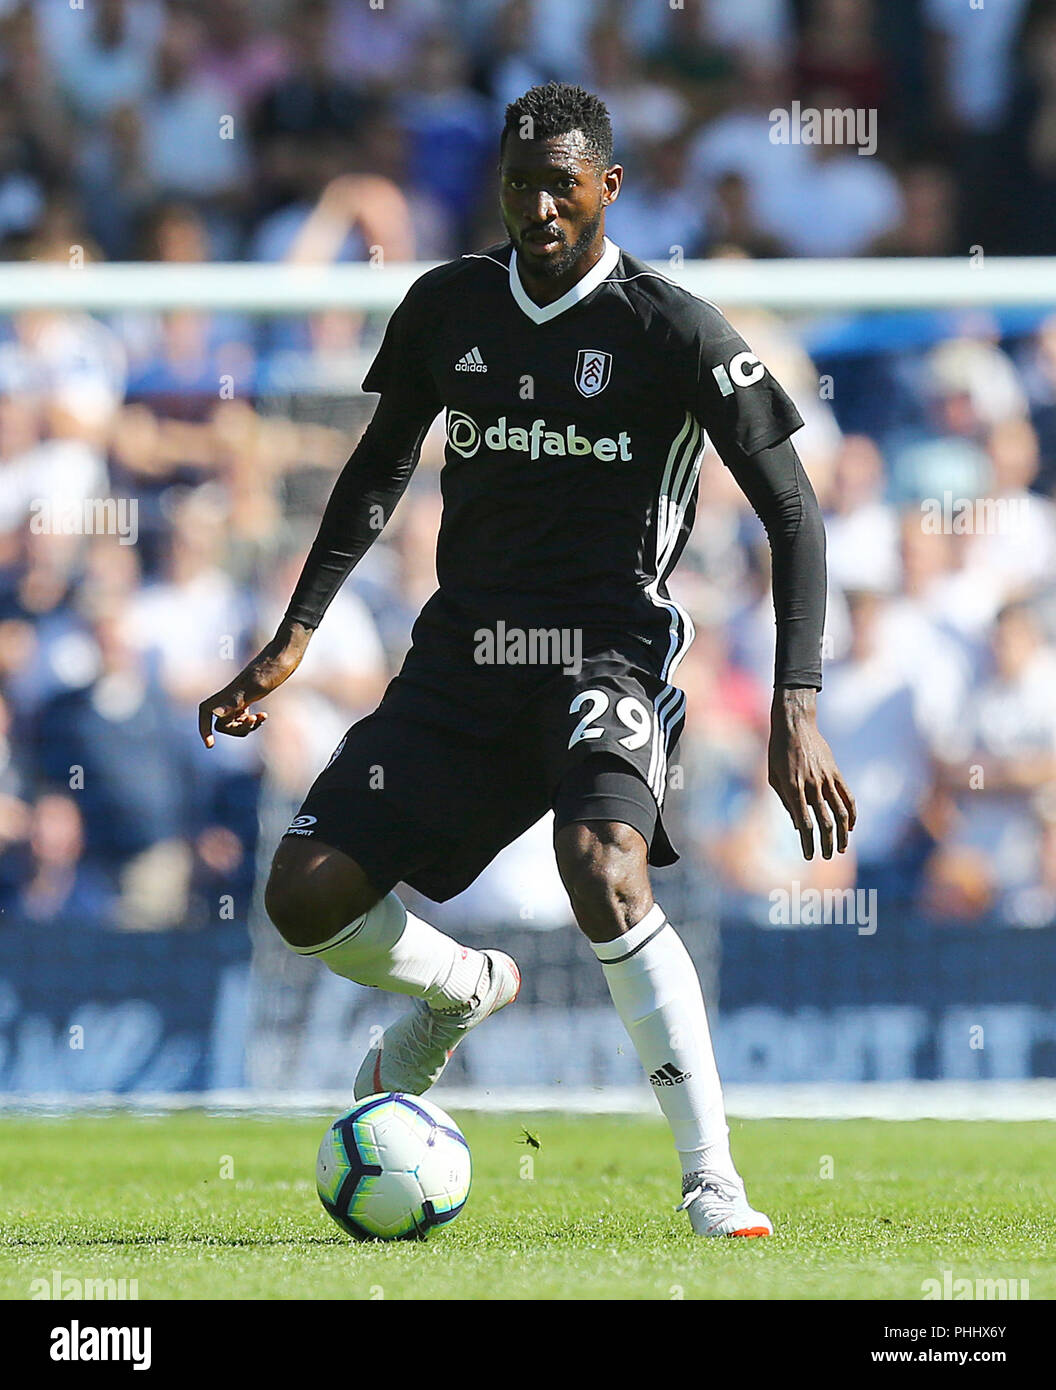 Fulham's Andre-Frank Zambo Anguissa during the Premier League match at the AMEX Stadium, Brighton. PRESS ASSOCIATION Photo. Picture date: Saturday September 1, 2018. See PA story SOCCER Brighton. Photo credit should read: Gareth Fuller/PA Wire. RESTRICTIONS: No use with unauthorised audio, video, data, fixture lists, club/league logos or 'live' services. Online in-match use limited to 120 images, no video emulation. No use in betting, games or single club/league/player publications. Stock Photo